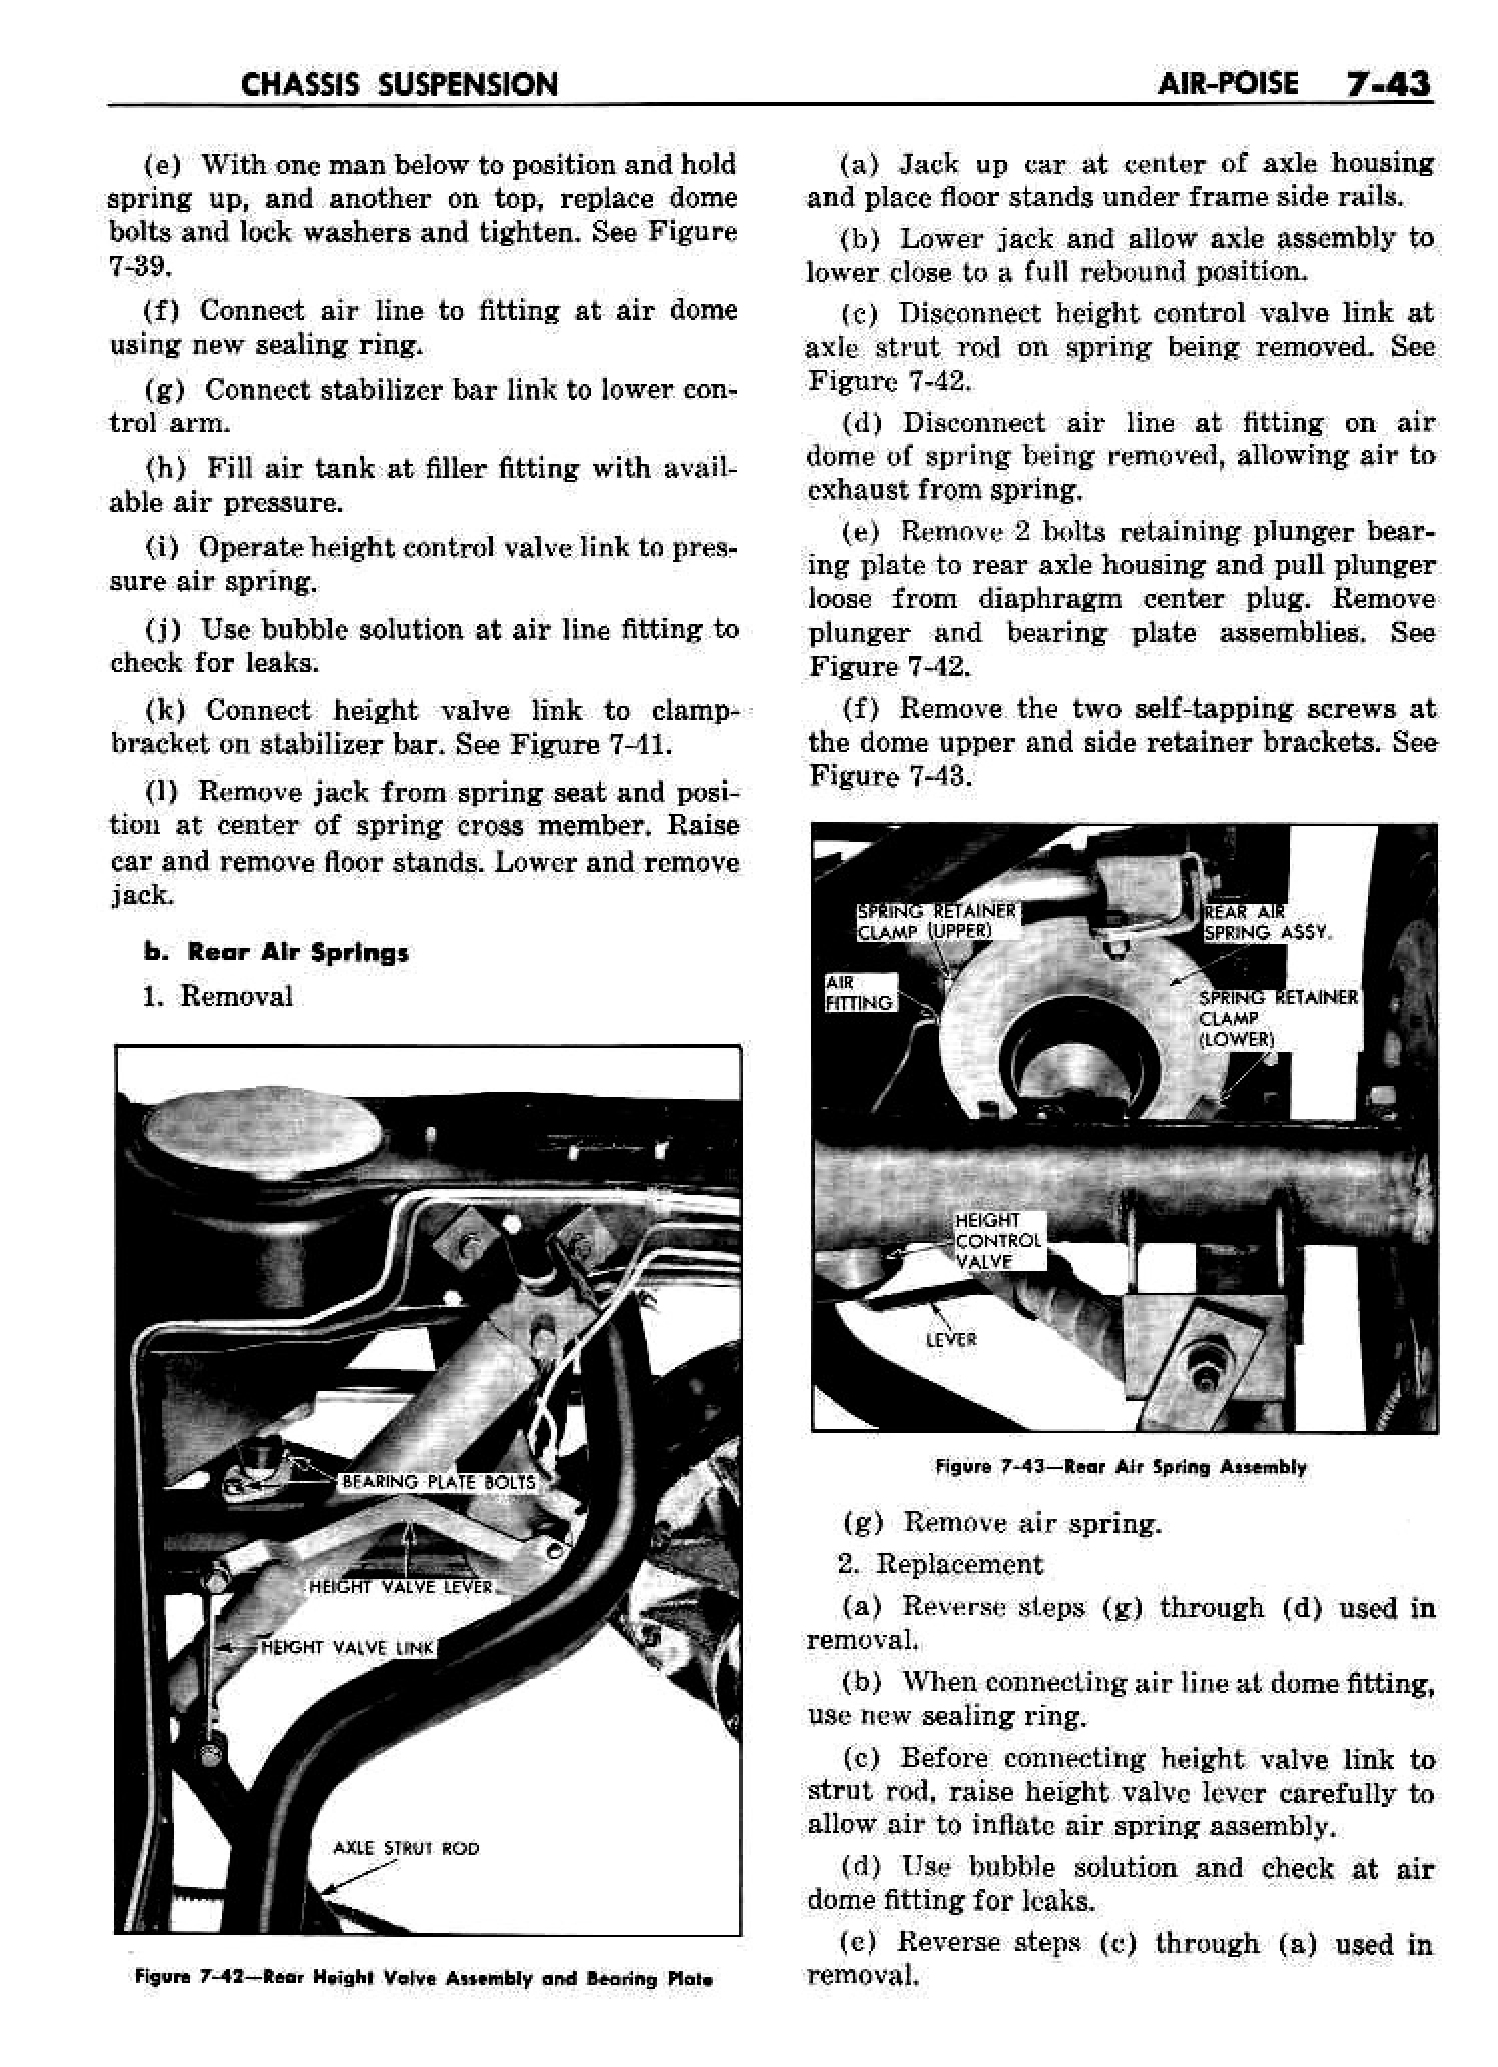 n_08 1958 Buick Shop Manual - Chassis Suspension_43.jpg